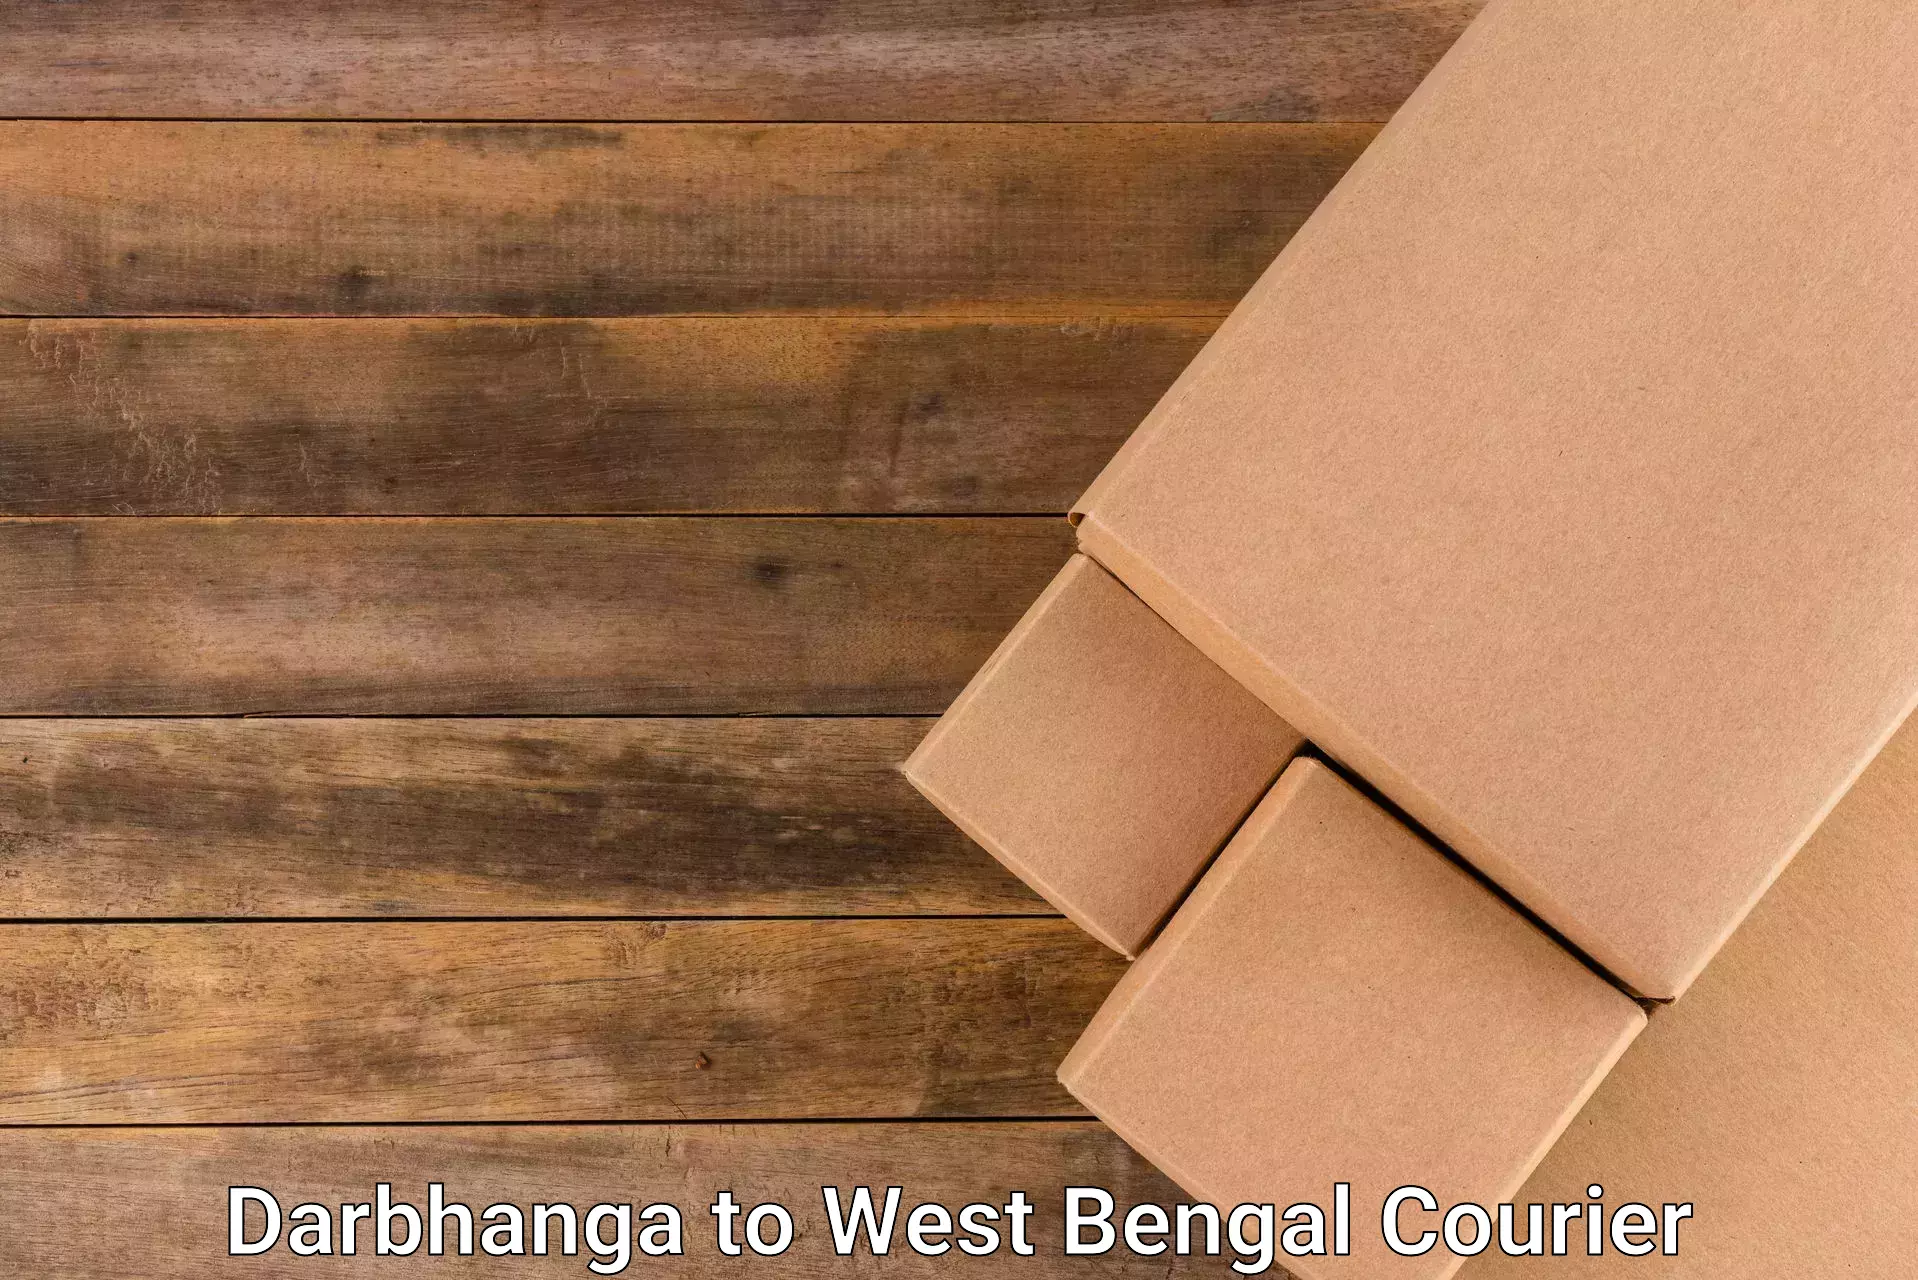 Courier service booking Darbhanga to Alipore